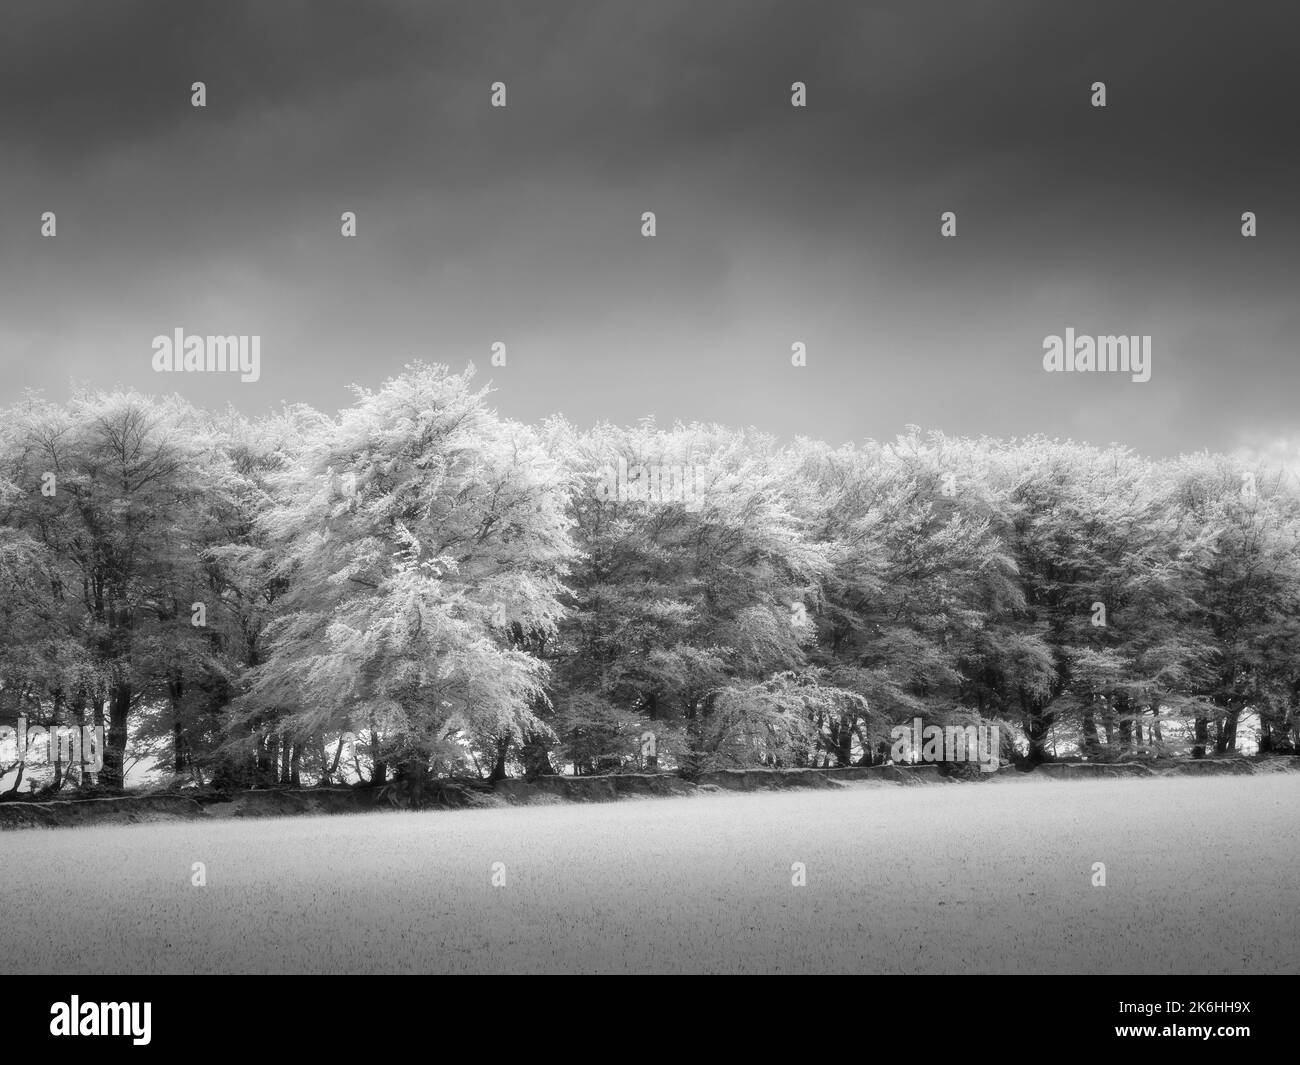 A black and white infrared image of a beech hedgebank on the Brendon Hills in Exmoor National Park, Somerset, England. Stock Photo